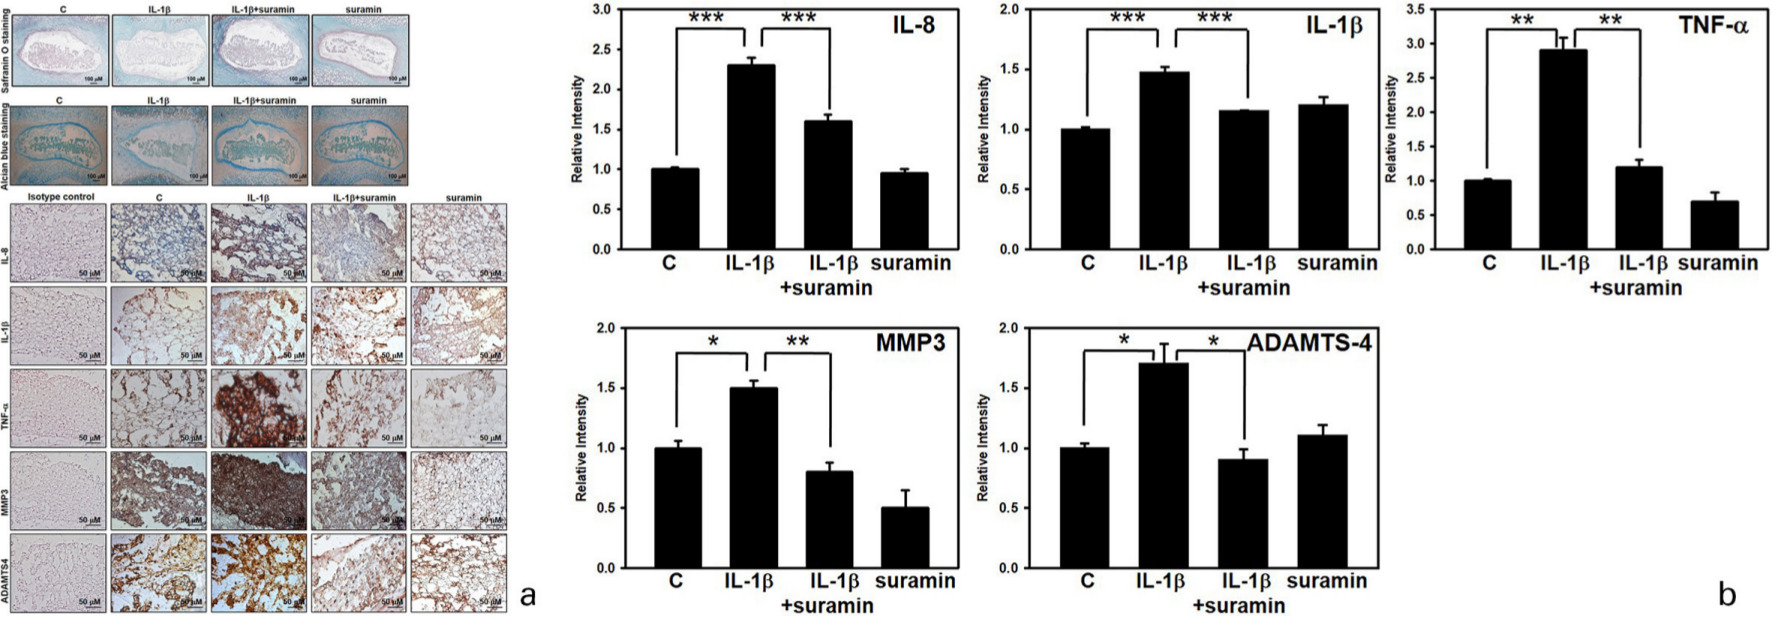 Fig. 8 
            Effect of suramin on nucleus pulposus (NP) matrix degeneration in an ex vivo rat NP model. a) The rat discs were dissected and incubated with vehicle (n = 5) or interleukin (IL)-1β (100 ng/ml) (n = 5), combined with or without suramin for seven days. Harvested discs were fixed in 4% paraformalin, and then decalcified followed by paraffin embedment. Serial disc sections of exactly 5 μm thickness were prepared for slides, and Safranin O-fast green (upper panel) and alcian blue (middle panel) staining was performed. Immunocytochemical analysis of IL-1β, IL-8, tumour necrosis factor alpha (TNF-α), matrix metalloproteinase (MMP)-3, and a disintegrin and metalloproteinase with thrombospondin motifs (ADAMTS)-4 in NP sections of discs (lower panel). b) Relative staining intensity in the disc NP matrix of mice that were treated with vehicle (n = 5) or IL-1β (100 ng/ml) (n = 5) combined with (n = 5) or without (n = 5) suramin for seven days. *p < 0.05, **p < 0.01, ***p < 0.001. c, control.
          